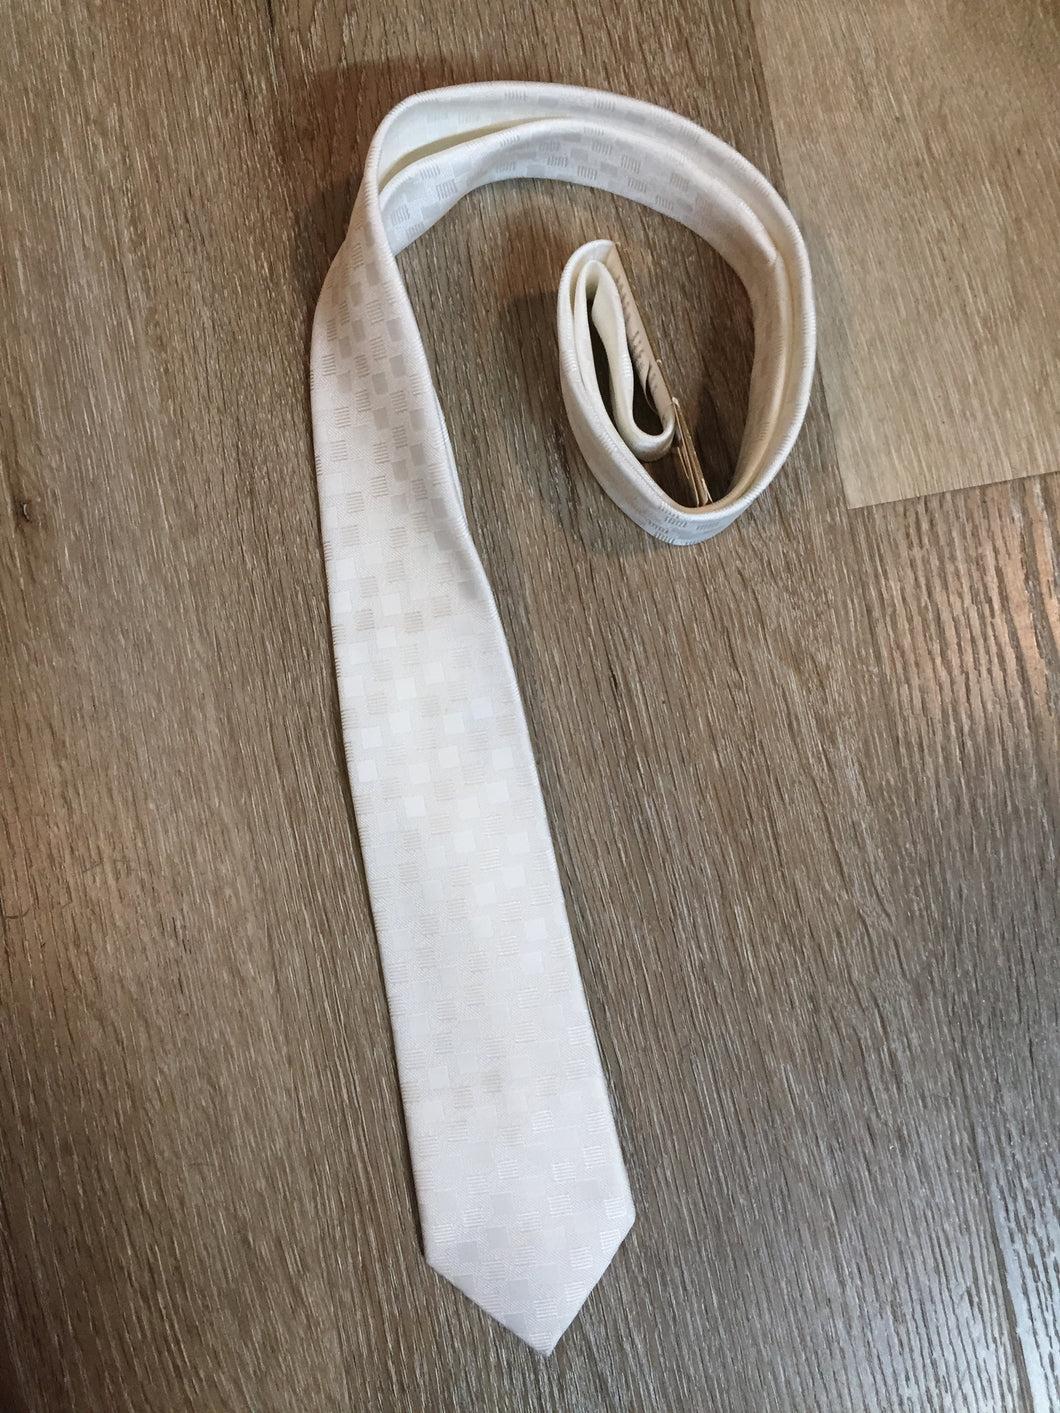 Kingspier Vintage - Park Lane of Canada “Terylene” (polyester fibre) white check tie.

Length: 52.5” 
Width: 2.25” 

This tie is in excellent condition.